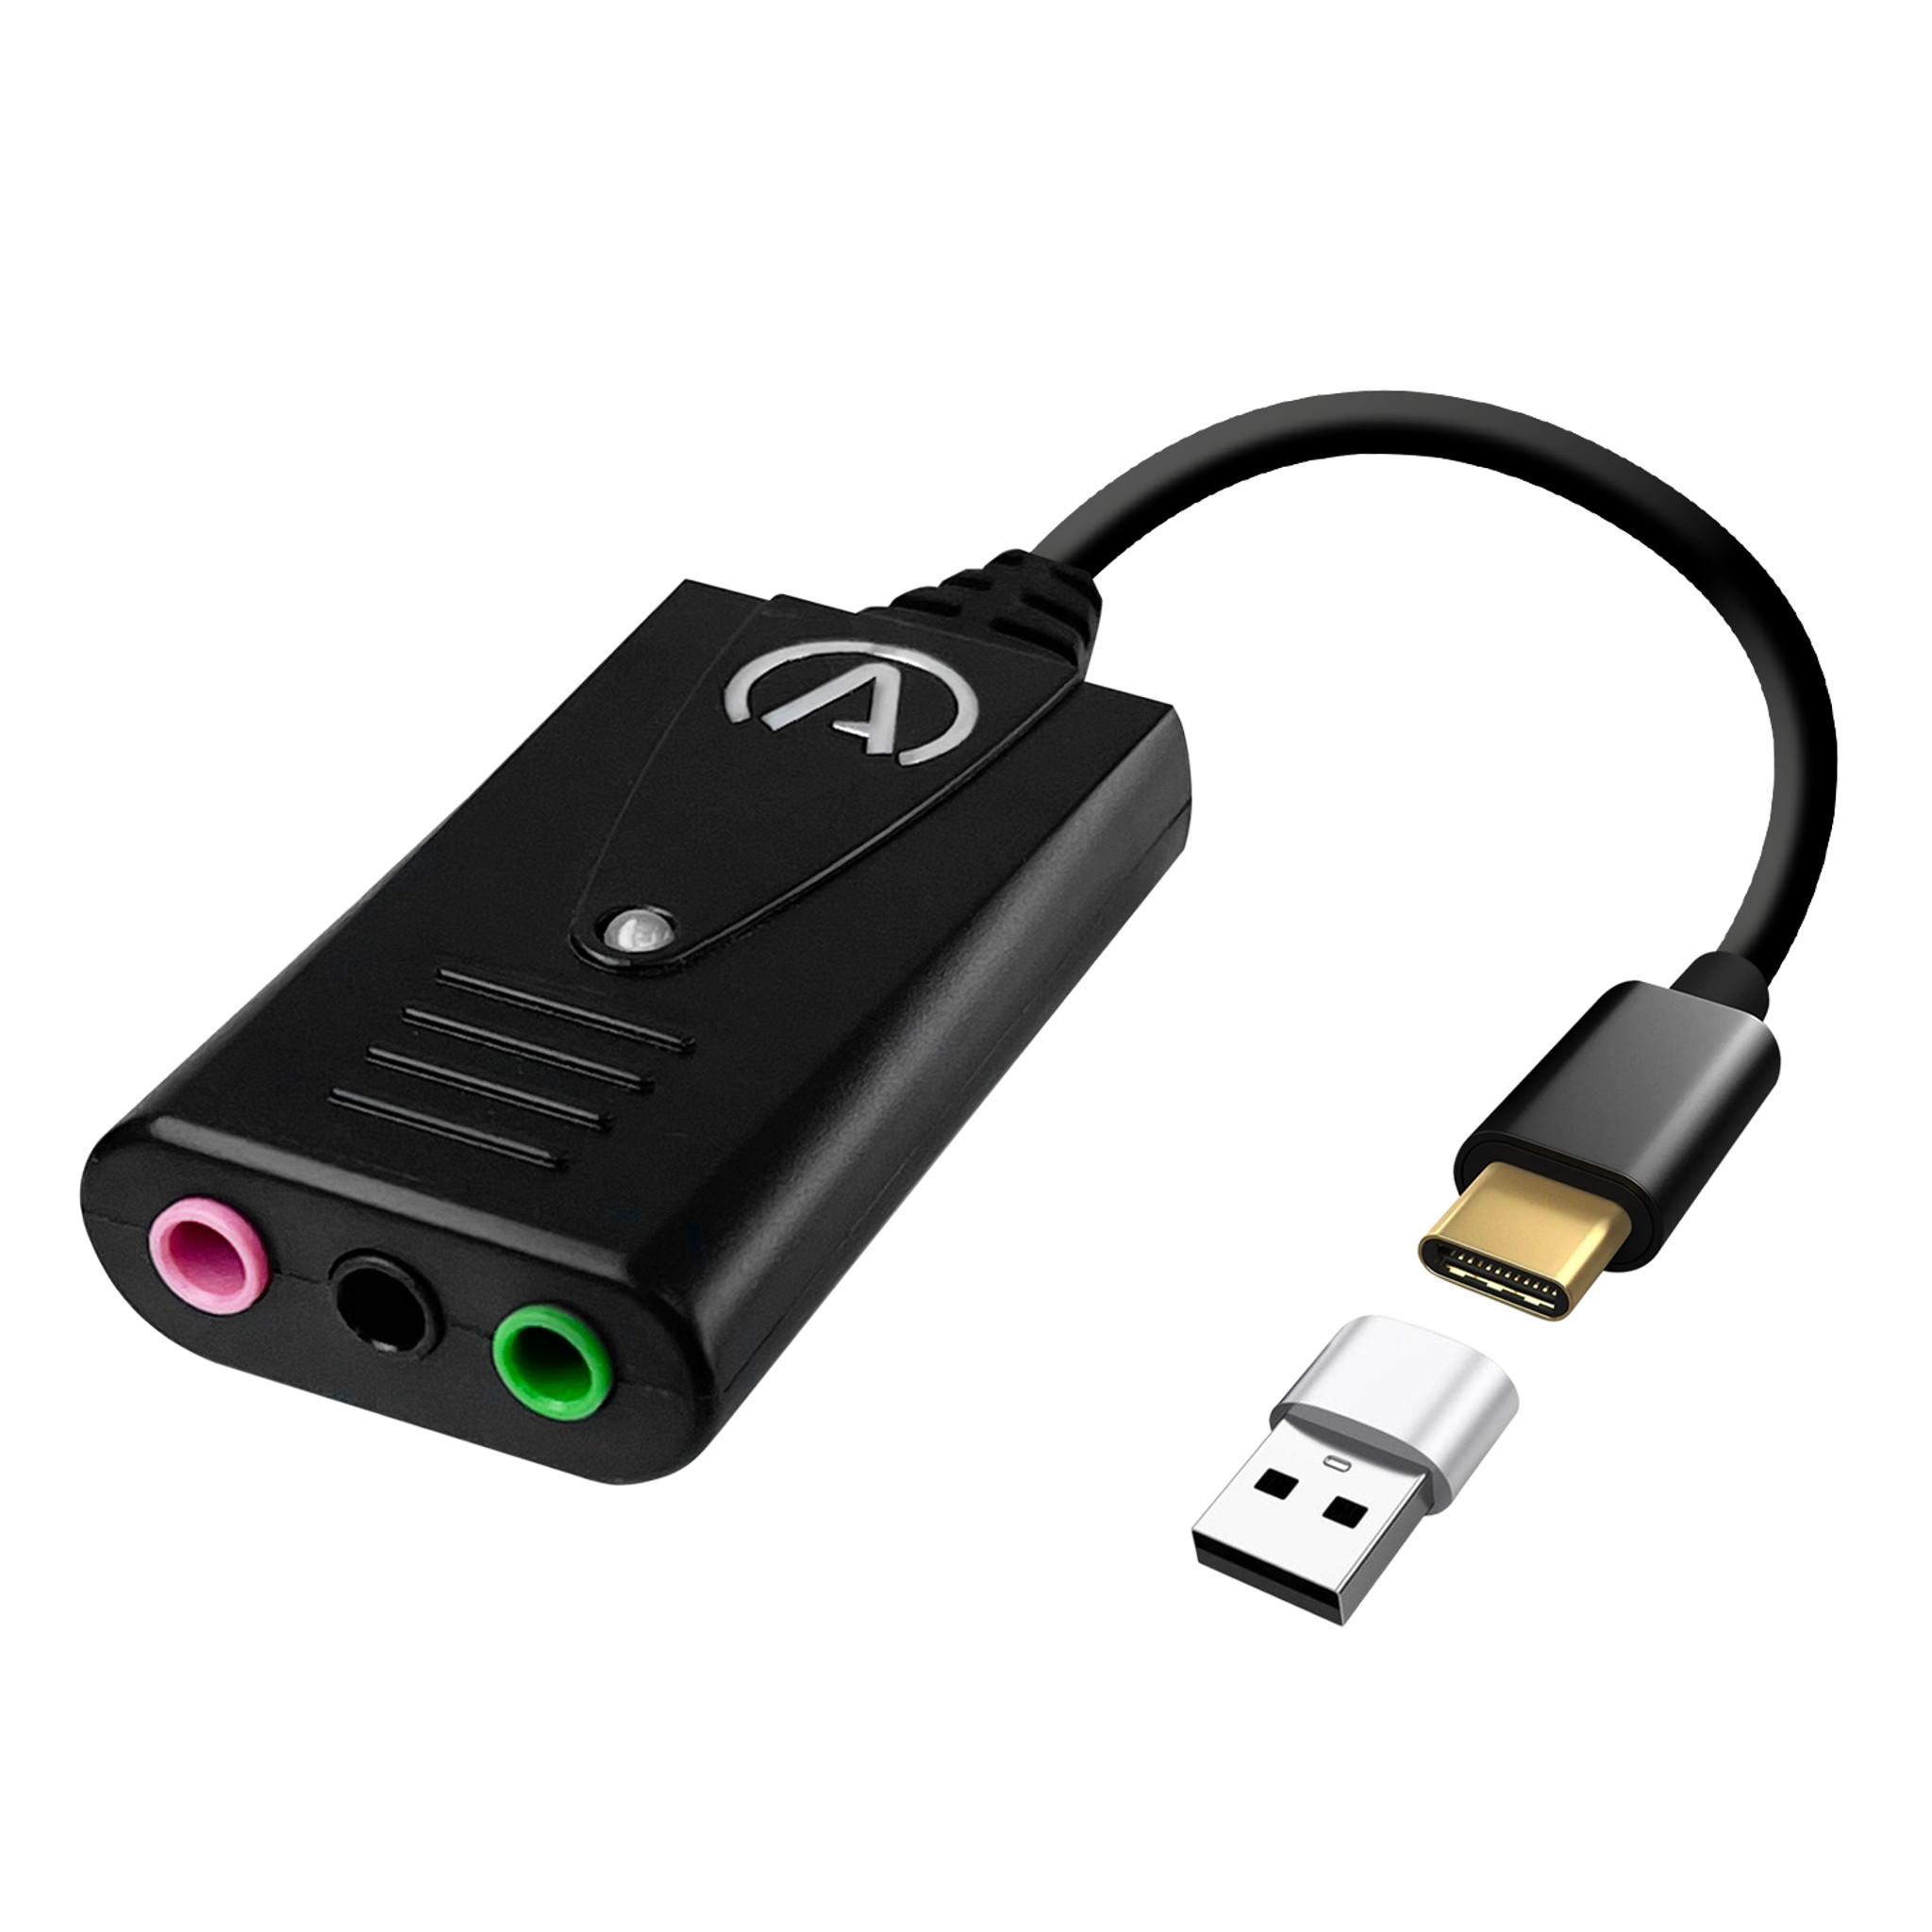 Andrea Communications USB-C Audio Adapter Questions & Answers